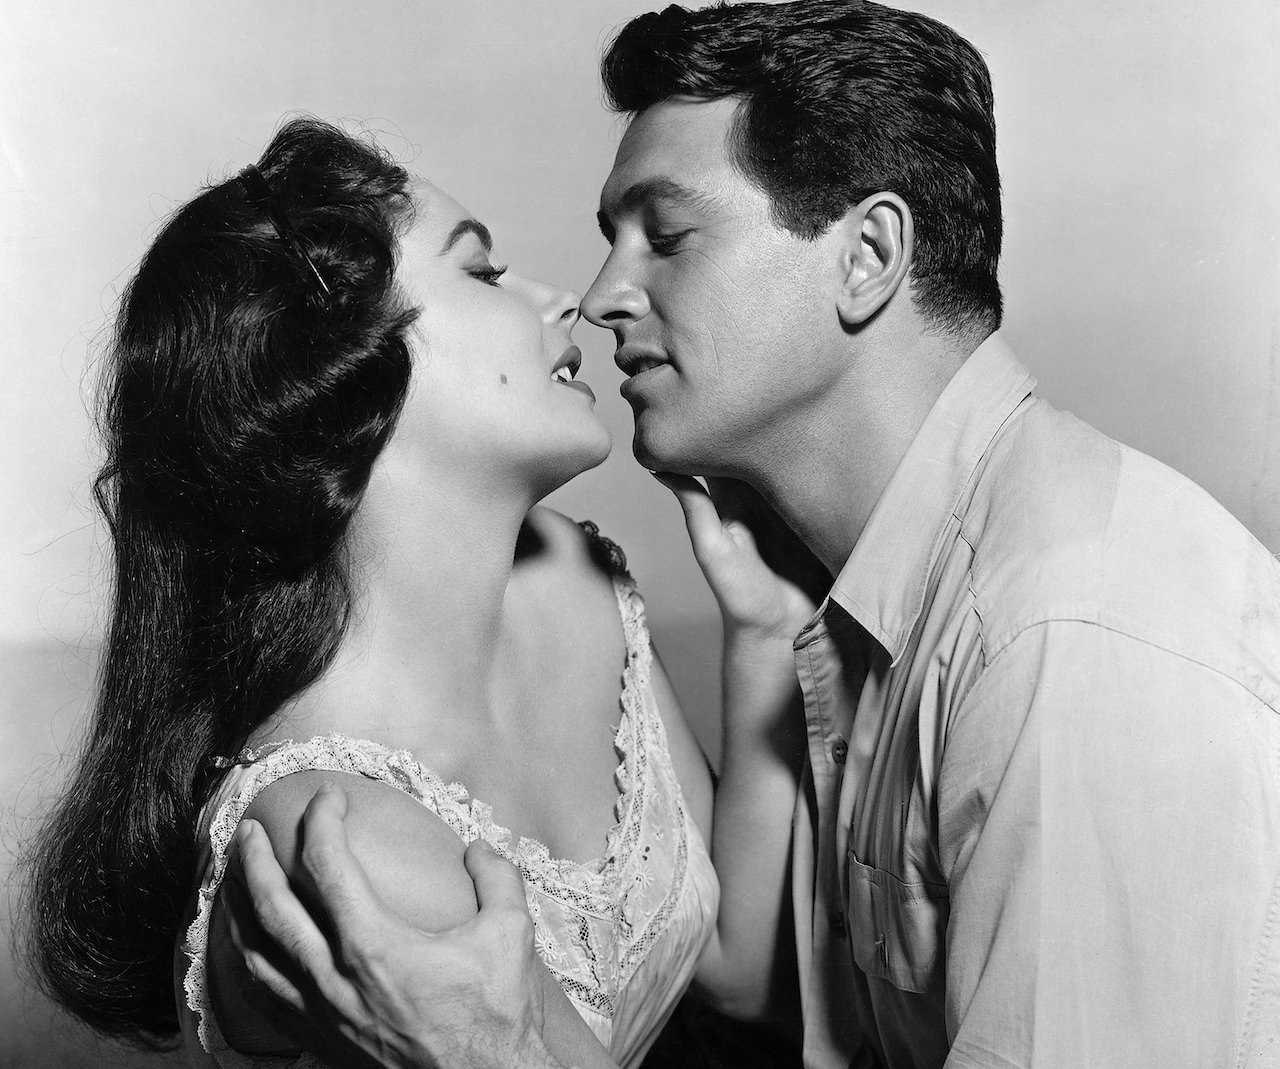 Elizabeth Taylor and Rock Hudson in a scene from the 1956 film, "Giant." They are shown in a waist-up view, embracing.